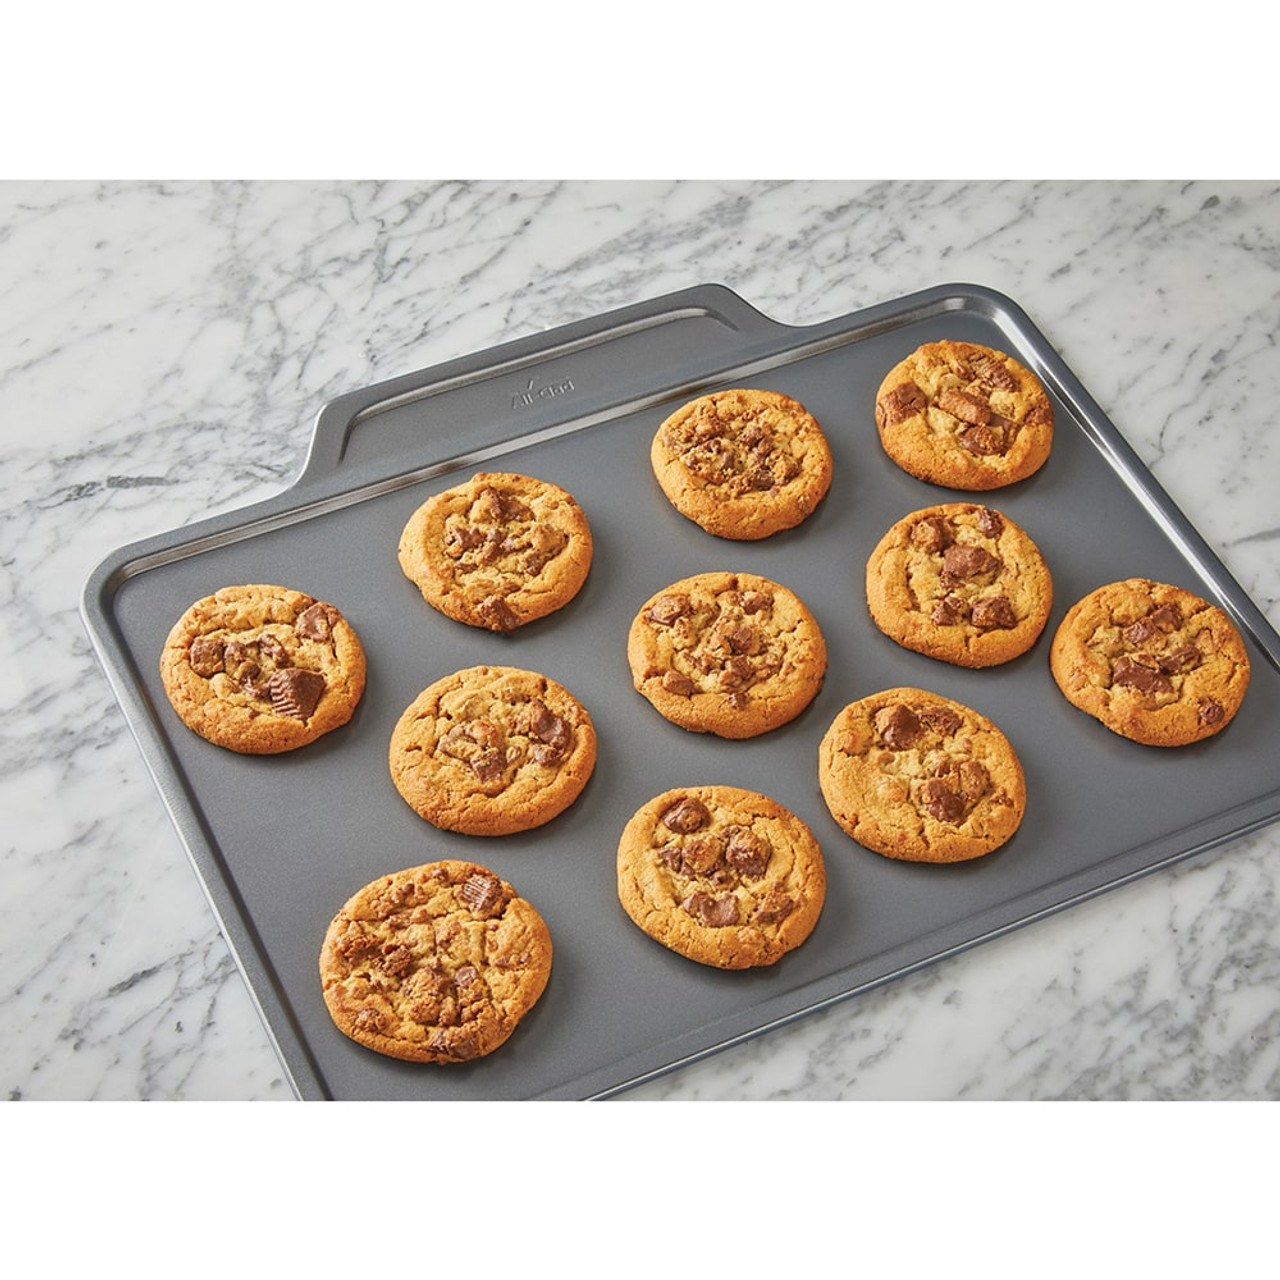 Jelly Roll Pan (Fits 8 Cookies) All-Clad